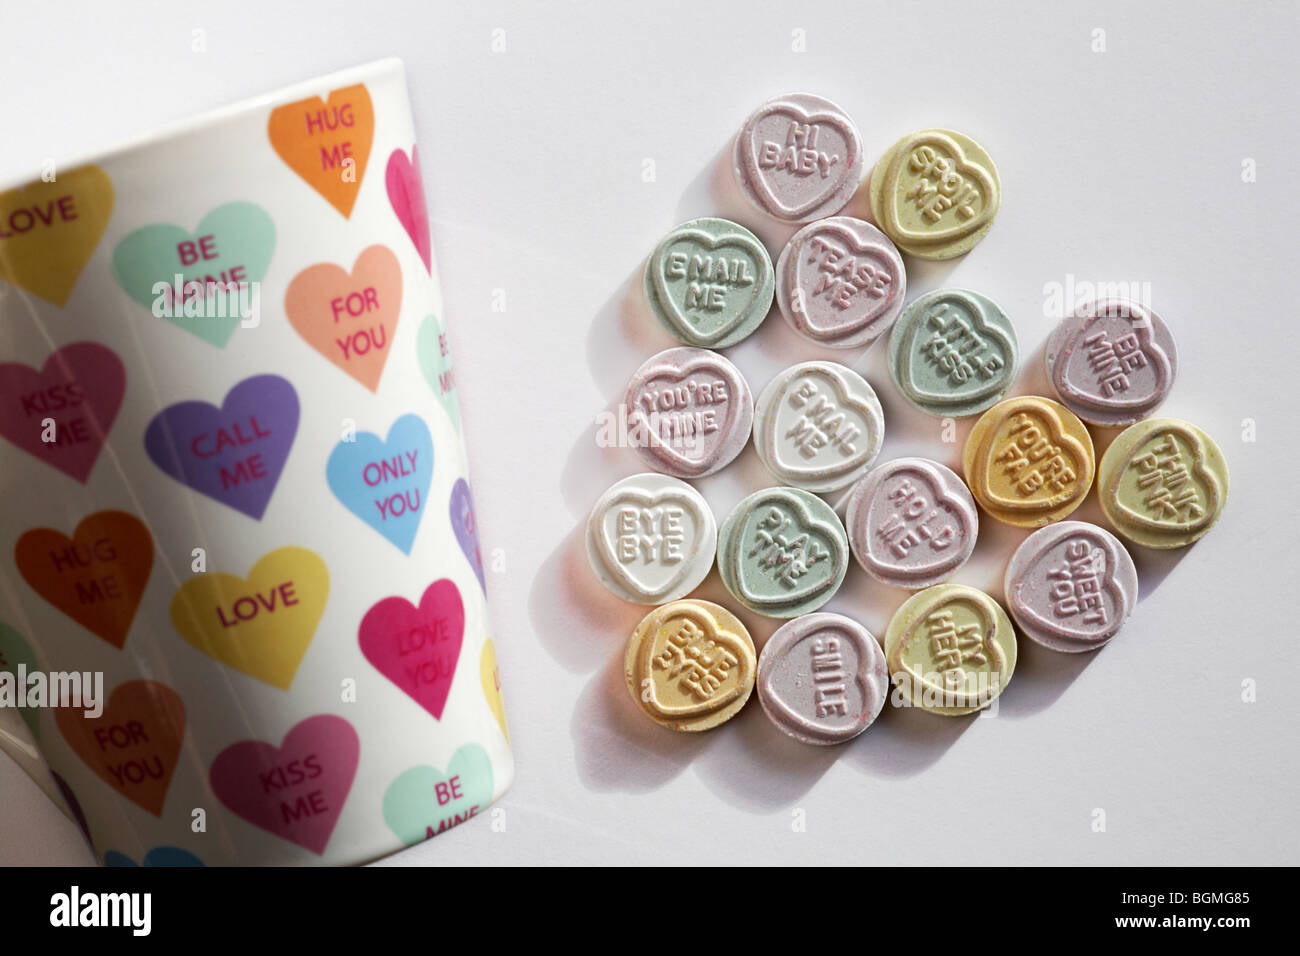 Sweetheart sweet heart - Love heart sweets with messages, arranged in a heart shape together with love hearts mug for Valentines day, Valentine day Stock Photo